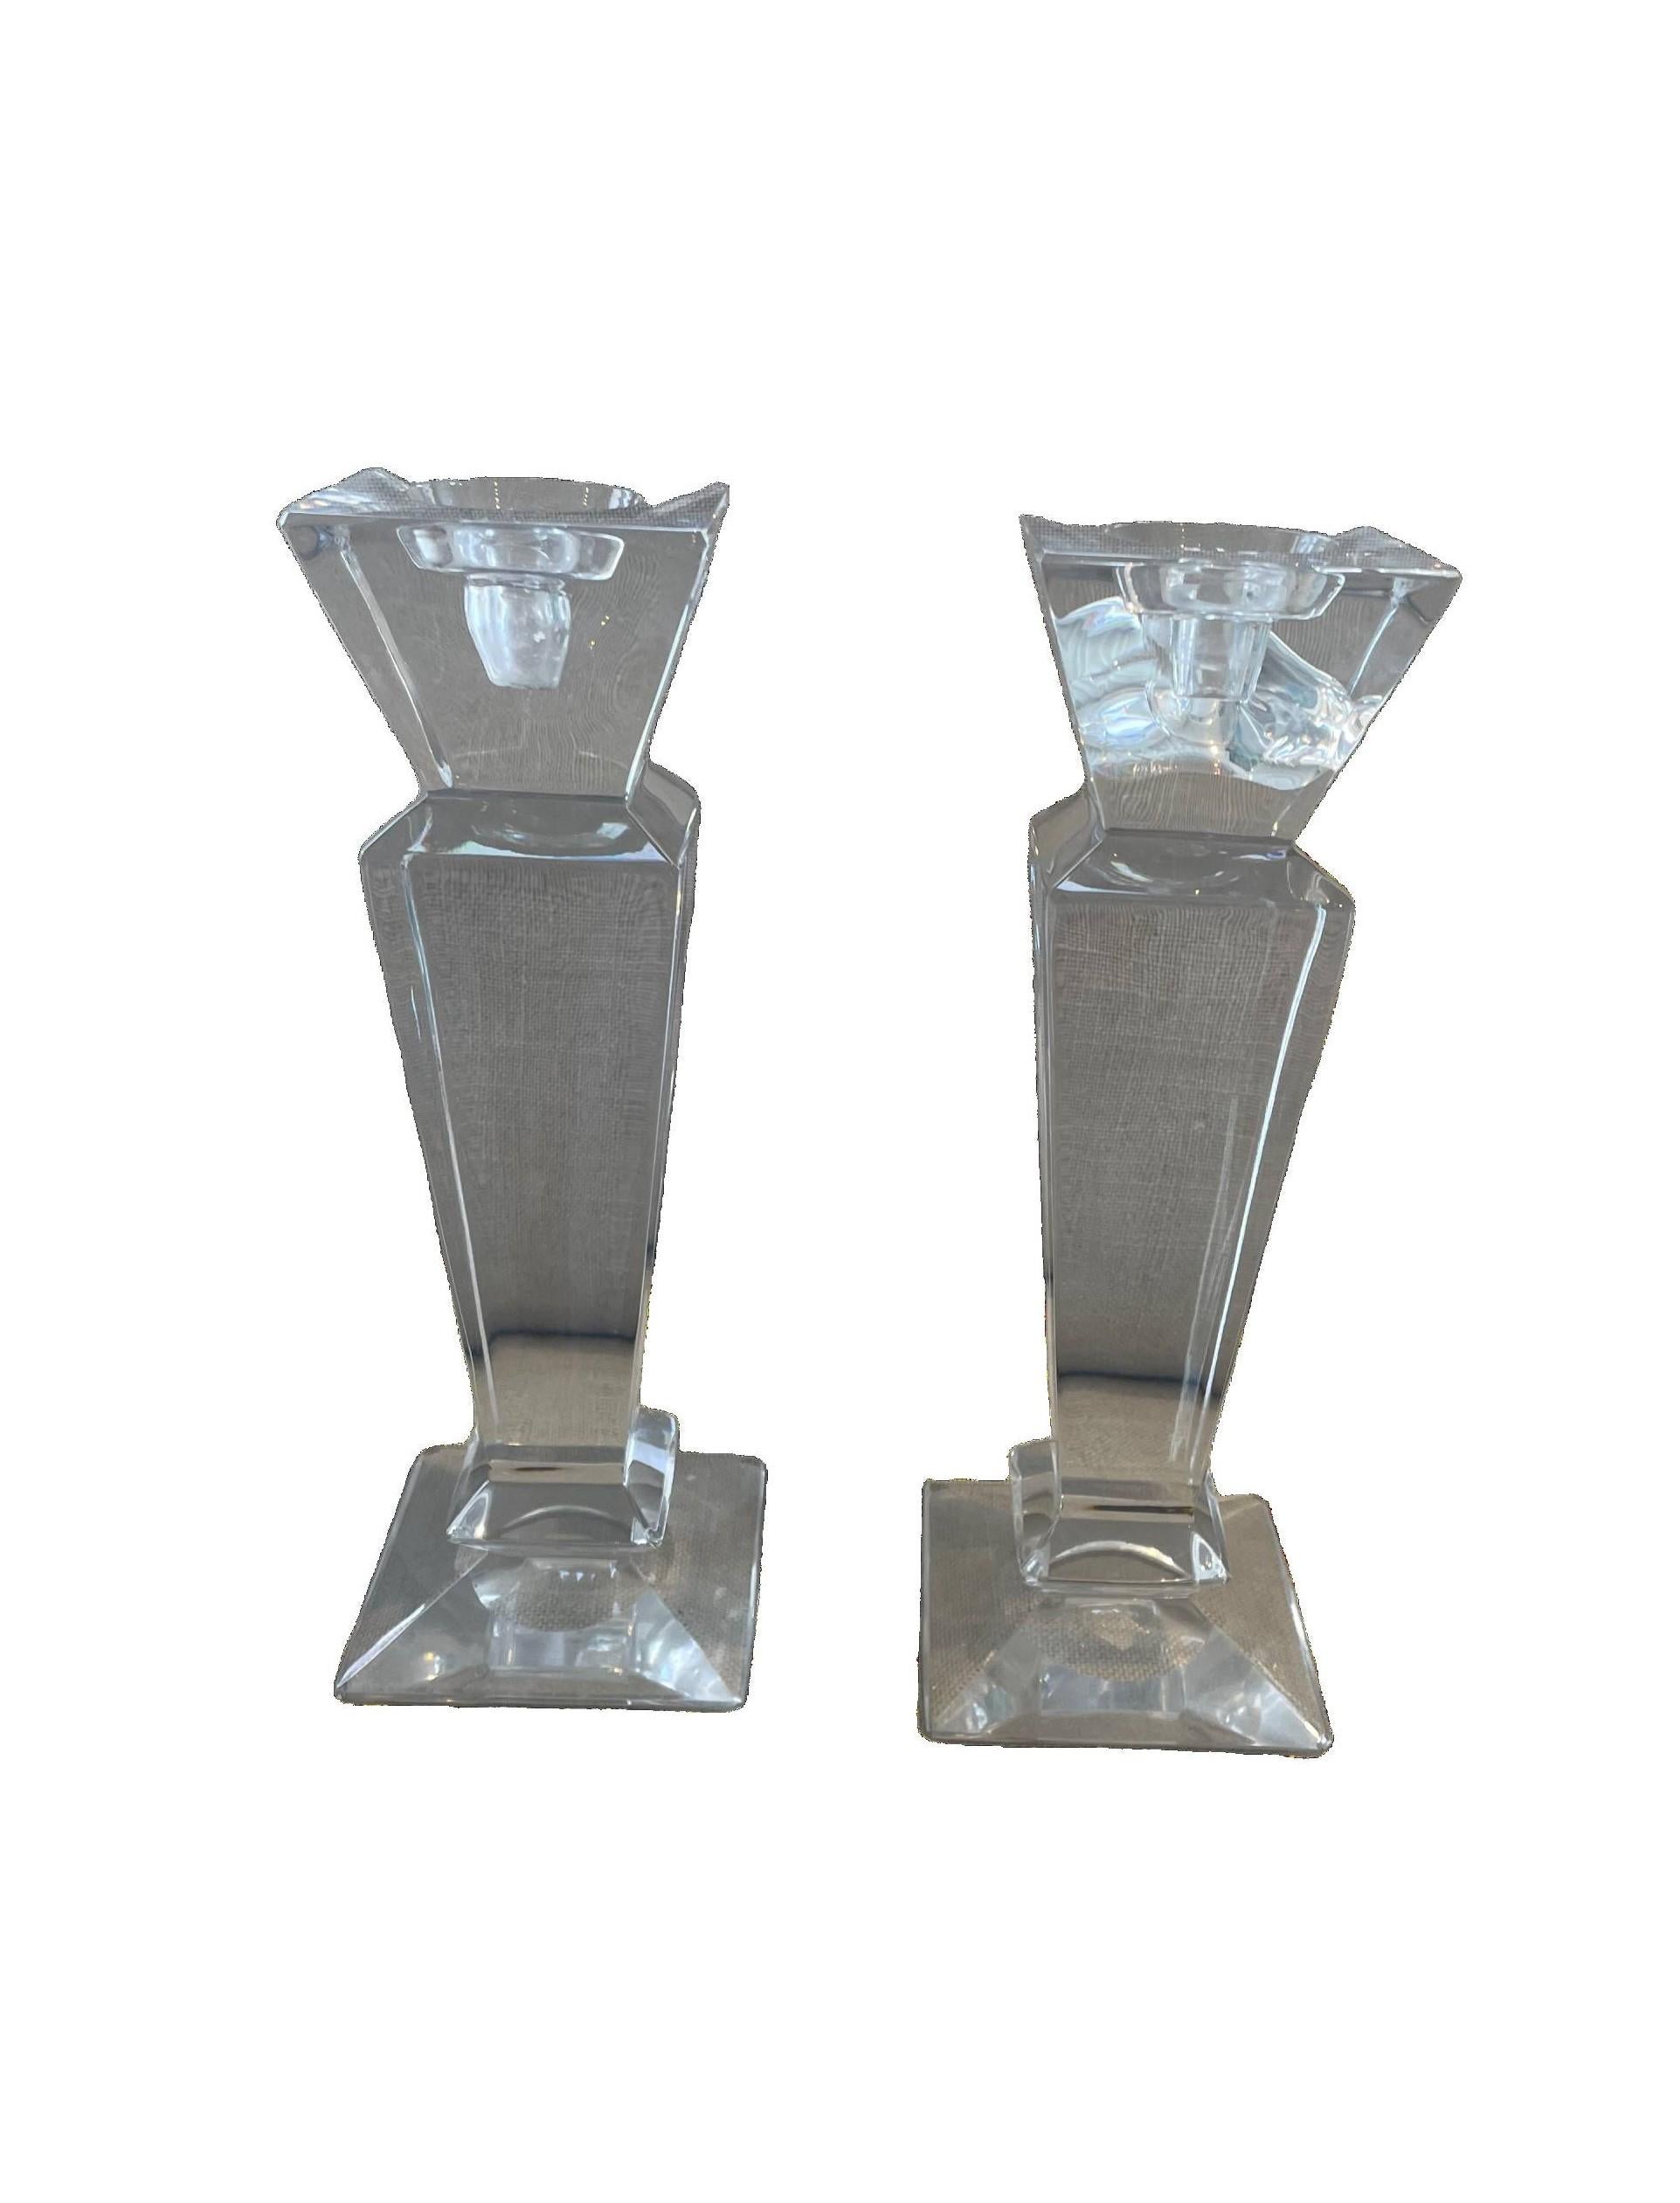 Solid glass candle holders from the pressed glass era (1930-1950). Solid, and pure in their simplicity.